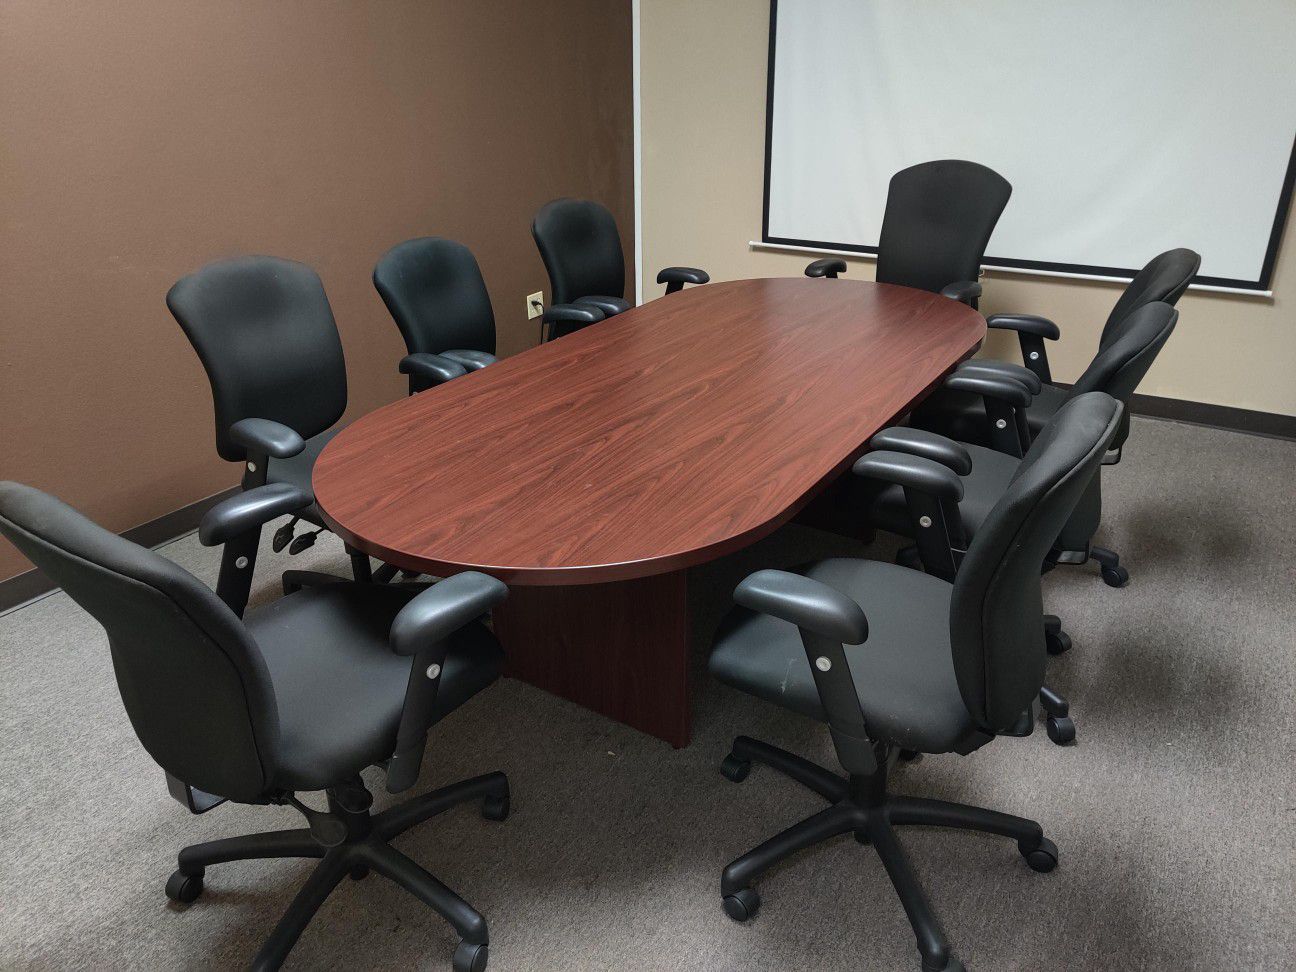 Conference table in great condition